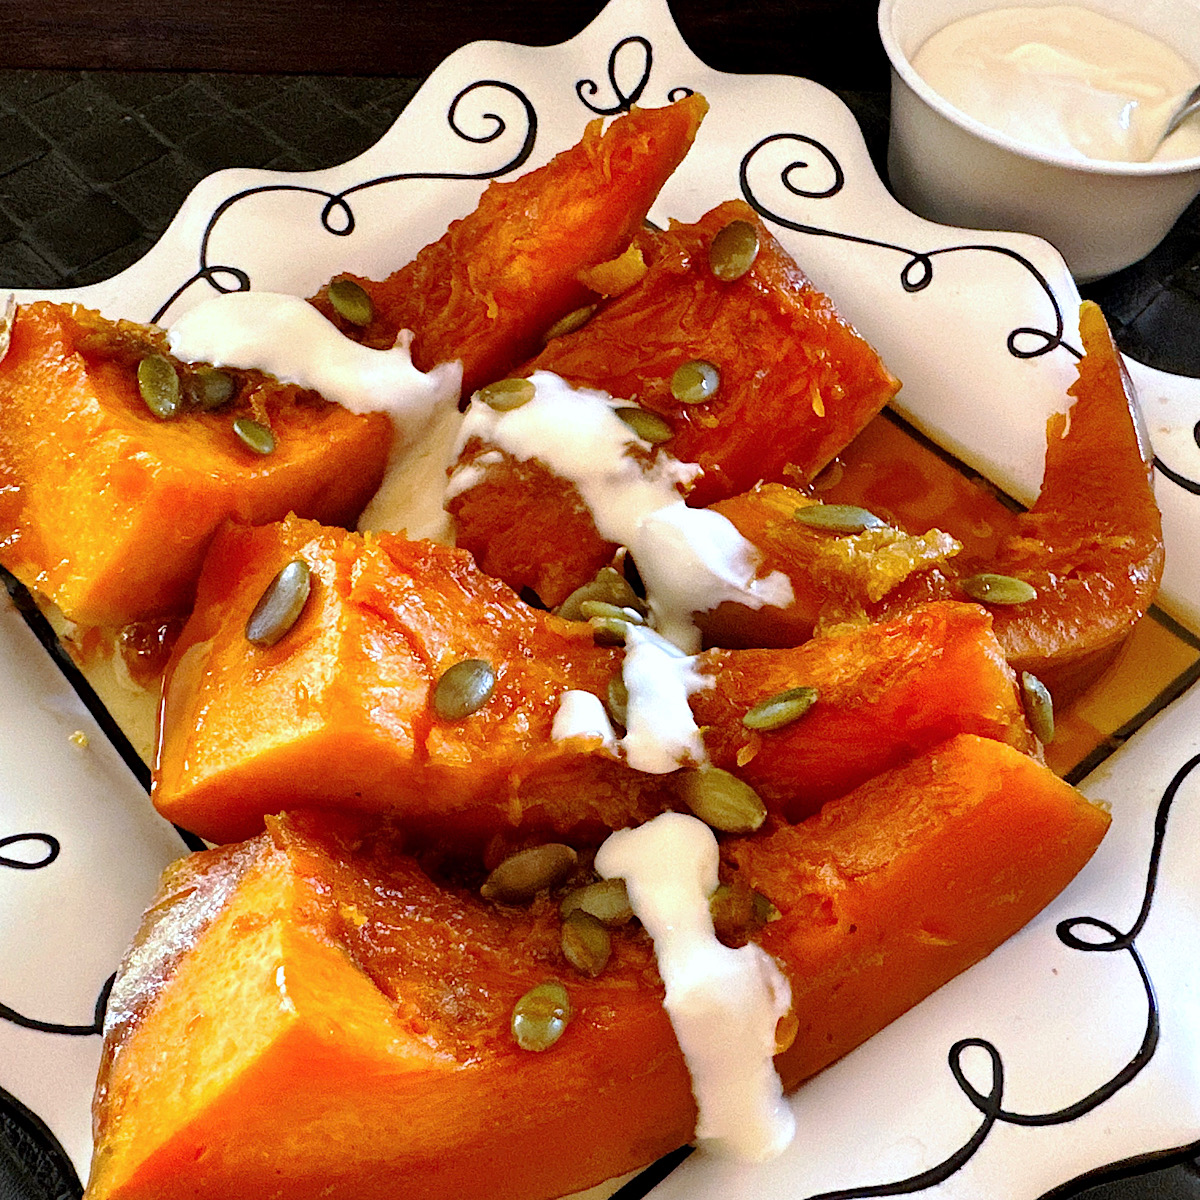 Candied pumpkin on a white plate with Mexican creama drizzled over it.